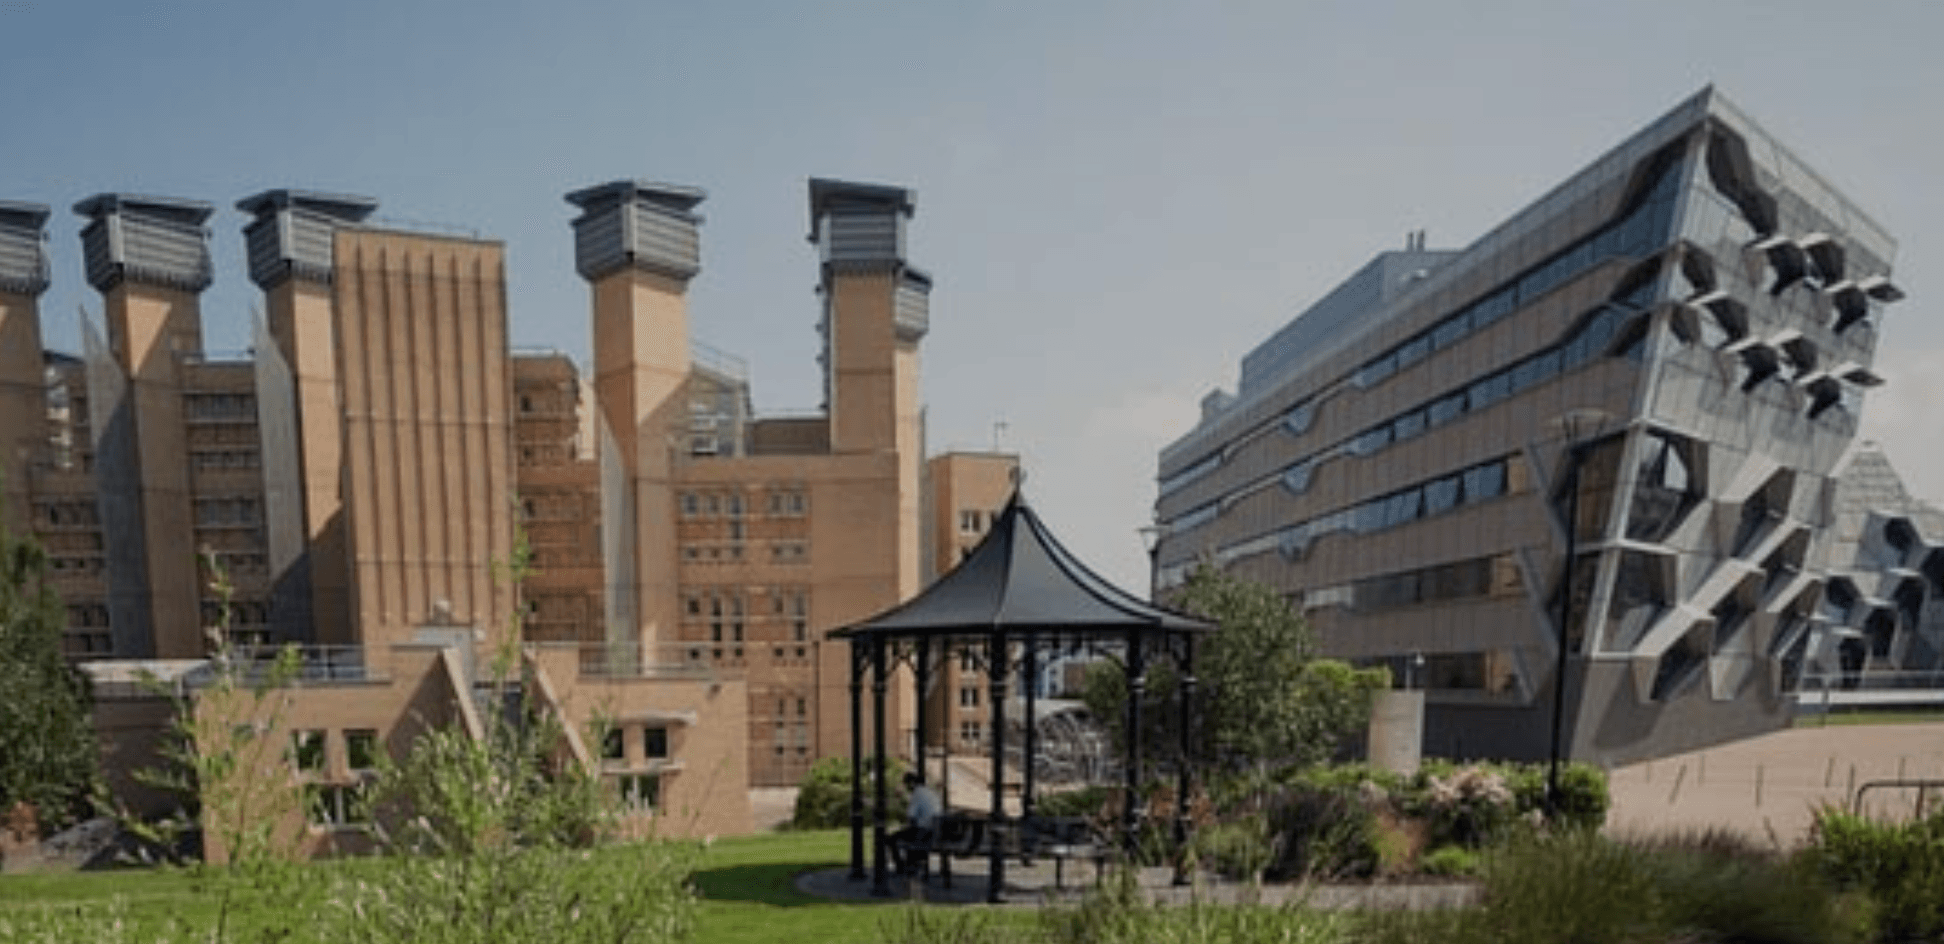 Landscape of Coventry University campus